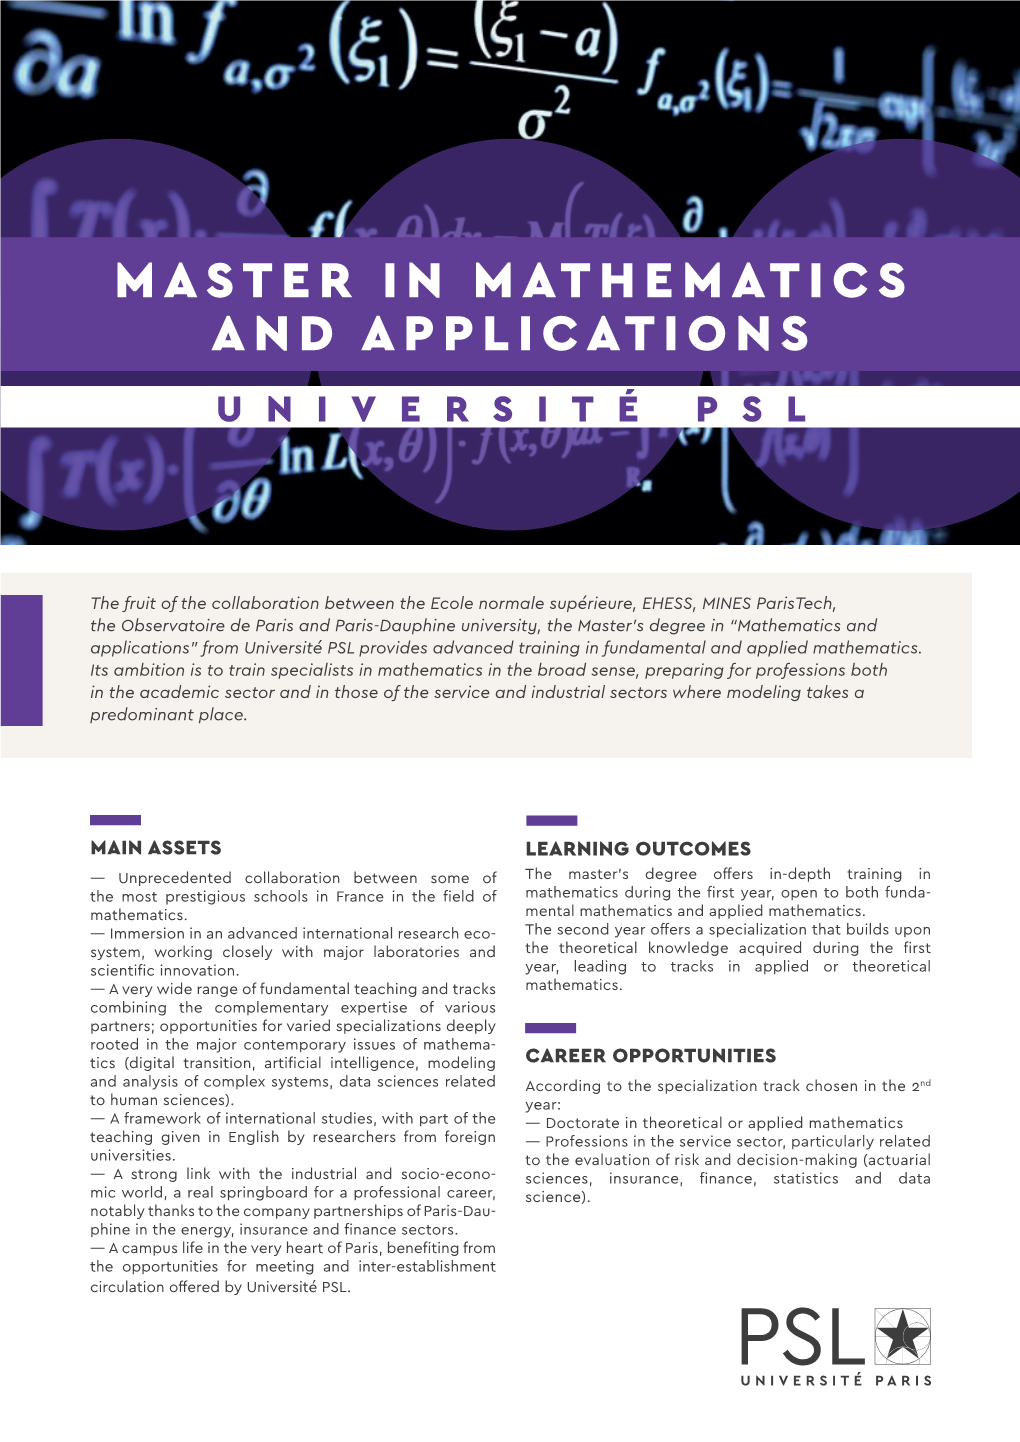 Master in Mathematics and Applications